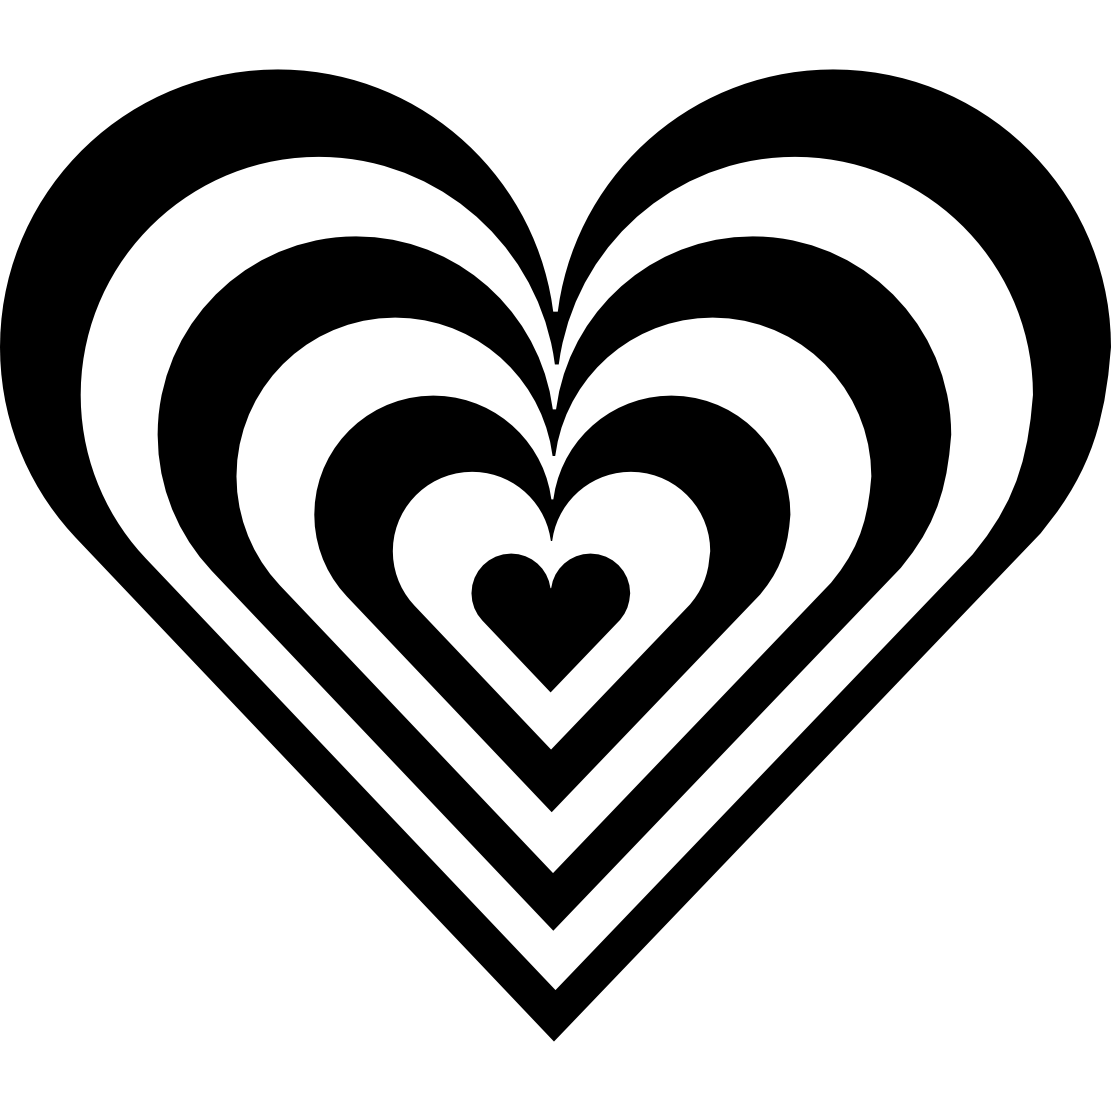 Black and White Heart Logo - Free Black And White Heart Clipart, Download Free Clip Art, Free ...